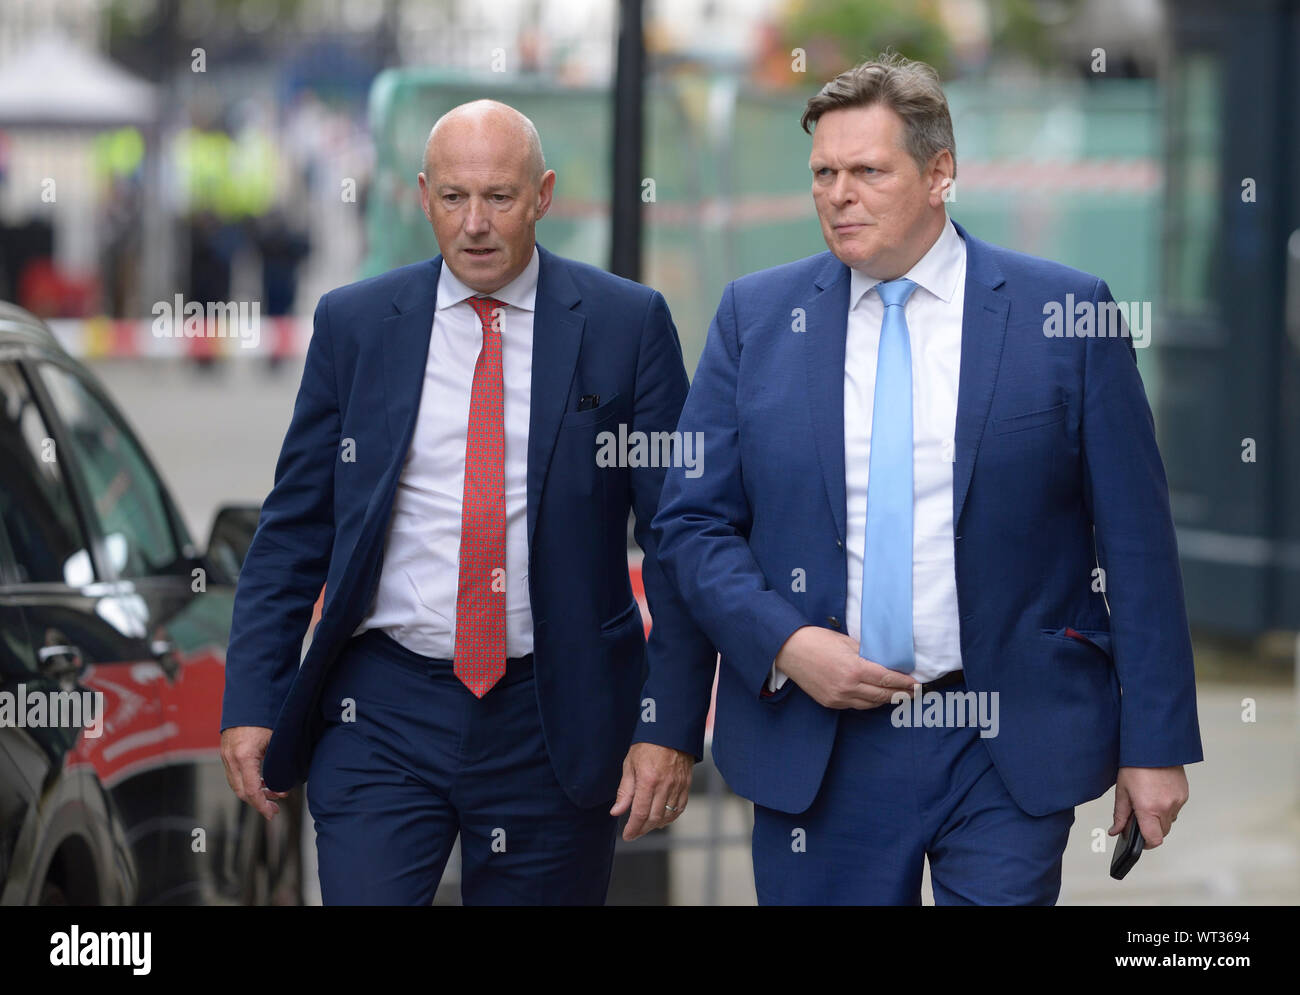 John Stevenson MP (Carlisle) and Stephen Kerr MP (Stirling) arrive in Downing Street for a gathering at Number 10, 2nd September 2019. Stock Photo